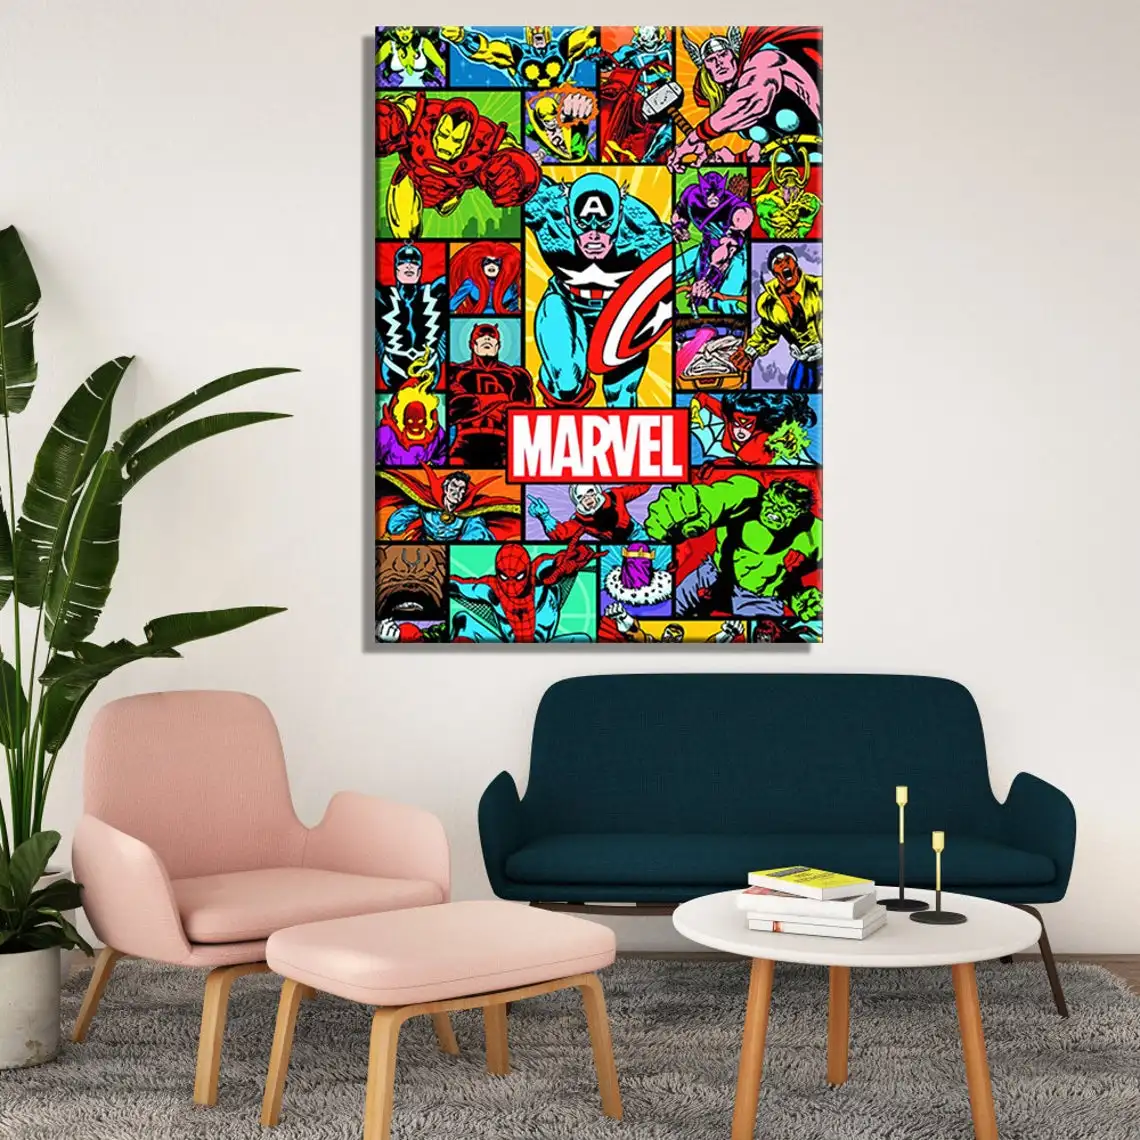 

Marvel Avengers Captain America Posters and Prints Canvas Painting On the Wall Art Pictures for Room Wall Home Decor Frameless